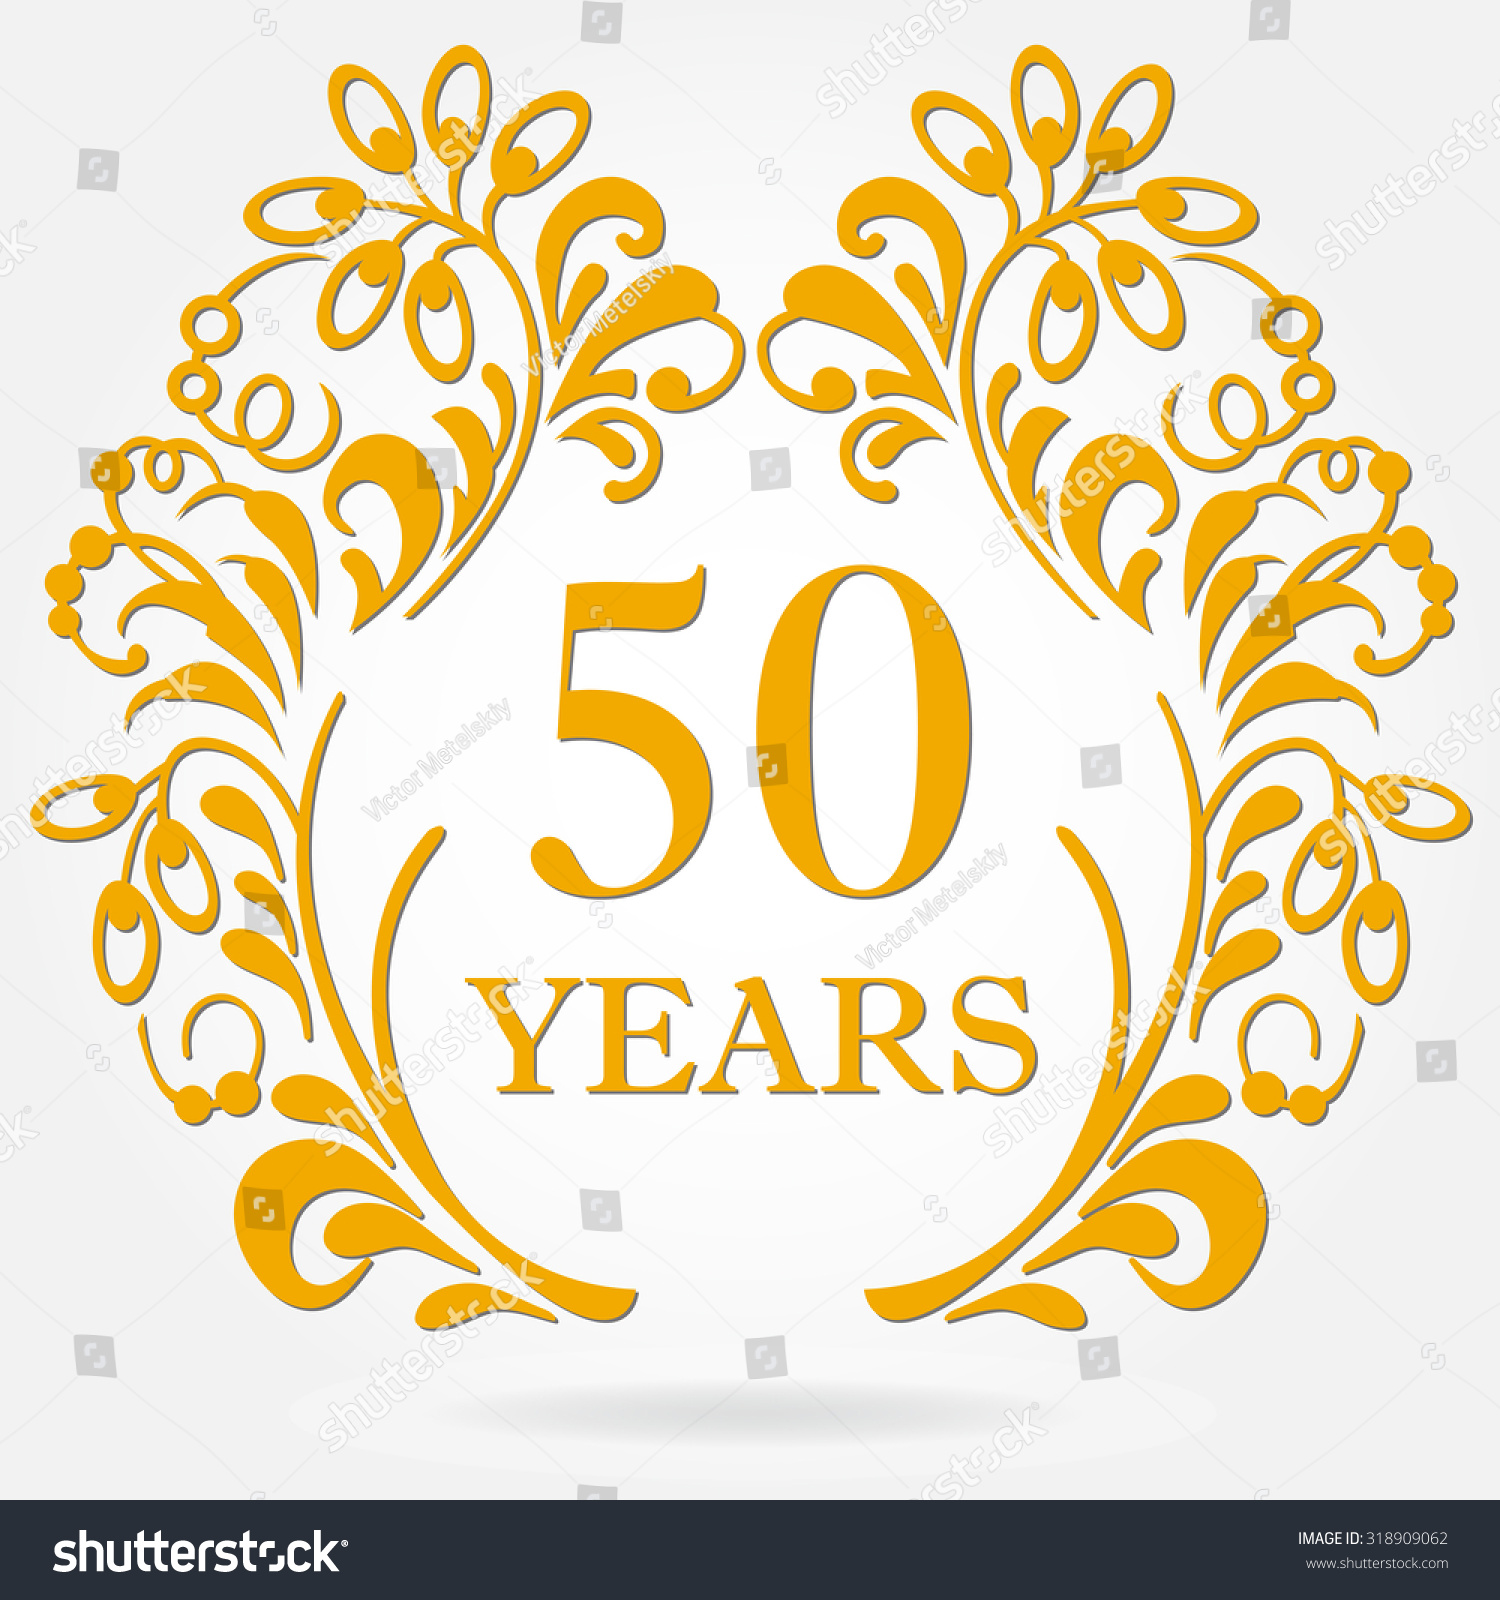 SVG of 50 years anniversary icon in ornate frame with floral elements. Template for celebration and congratulation design. 50th anniversary golden label. Vector illustration. svg